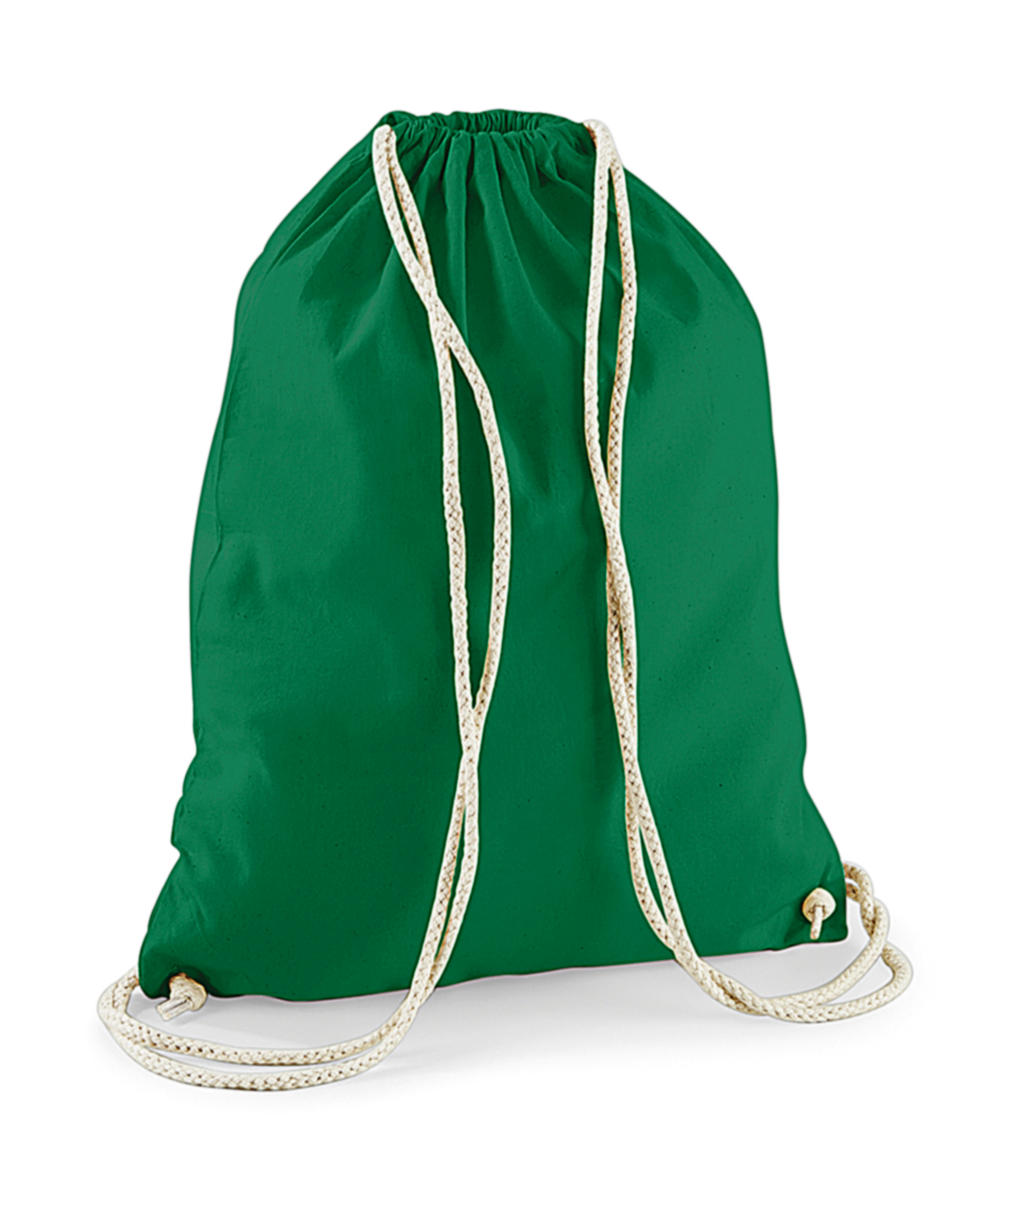  Cotton Gymsac in Farbe Kelly Green